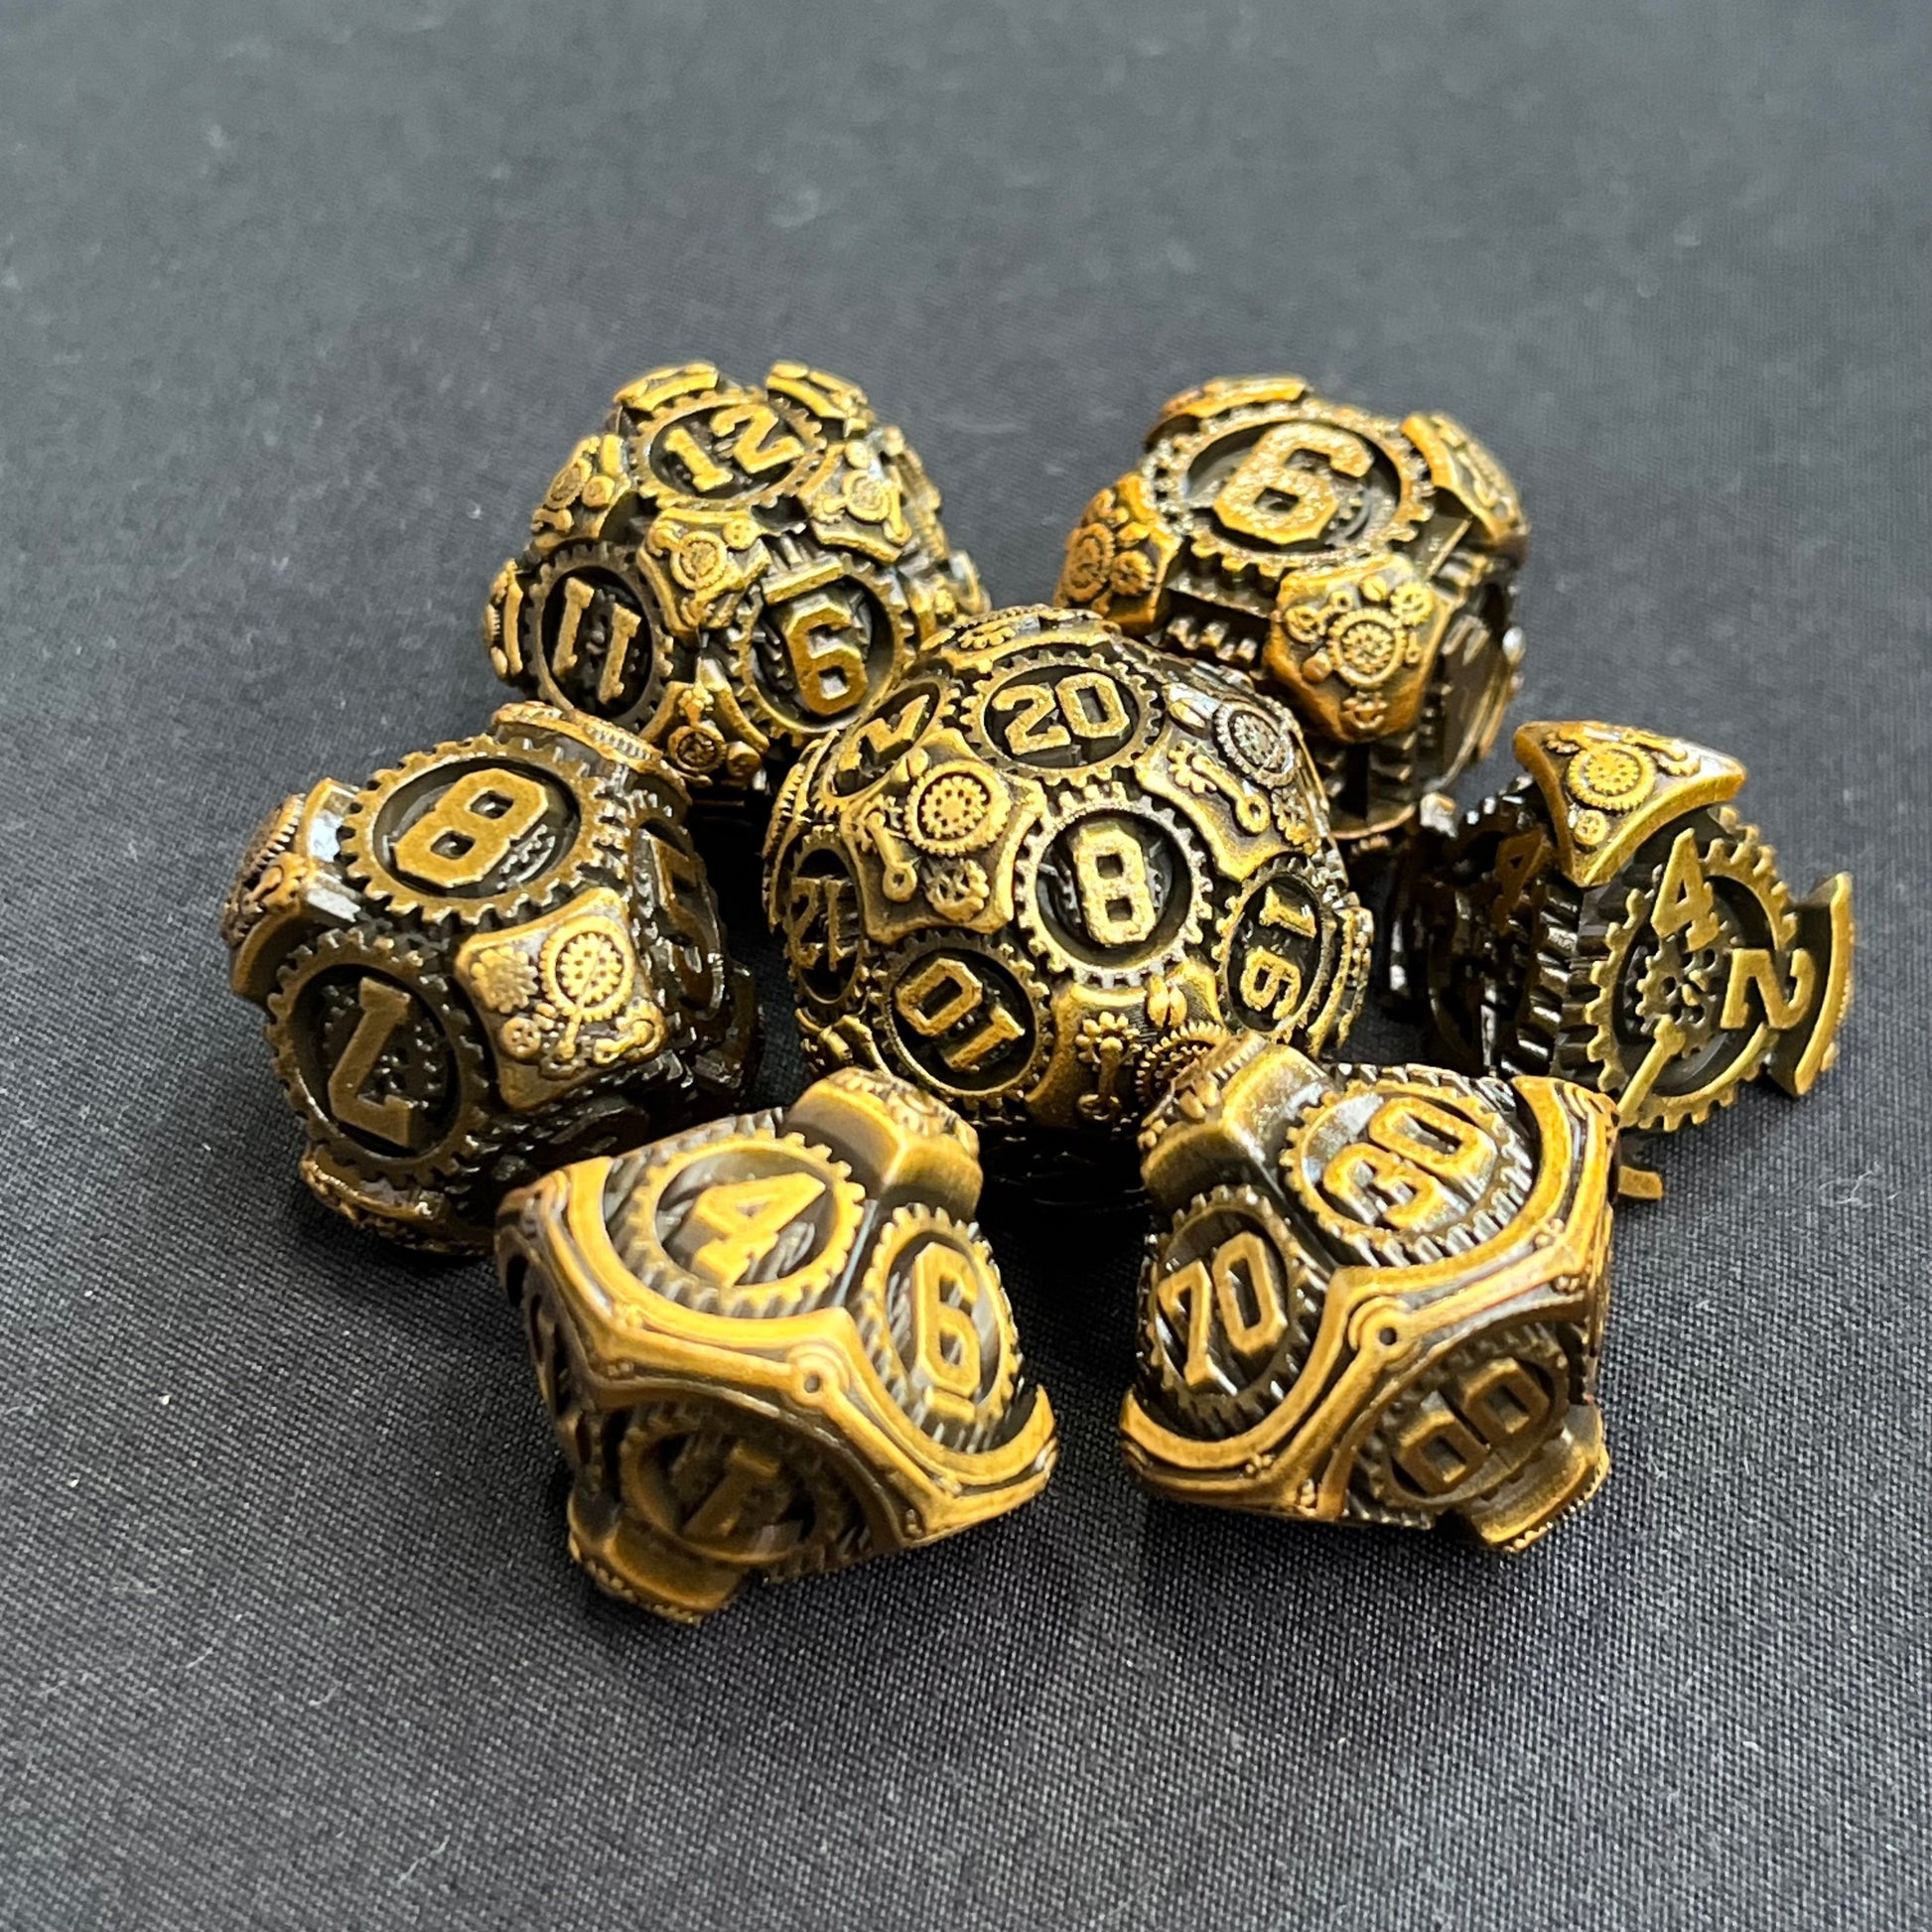 Steampunk metal dnd dice set, TTRPG role playing game for dice goblin and dice dragon collectors